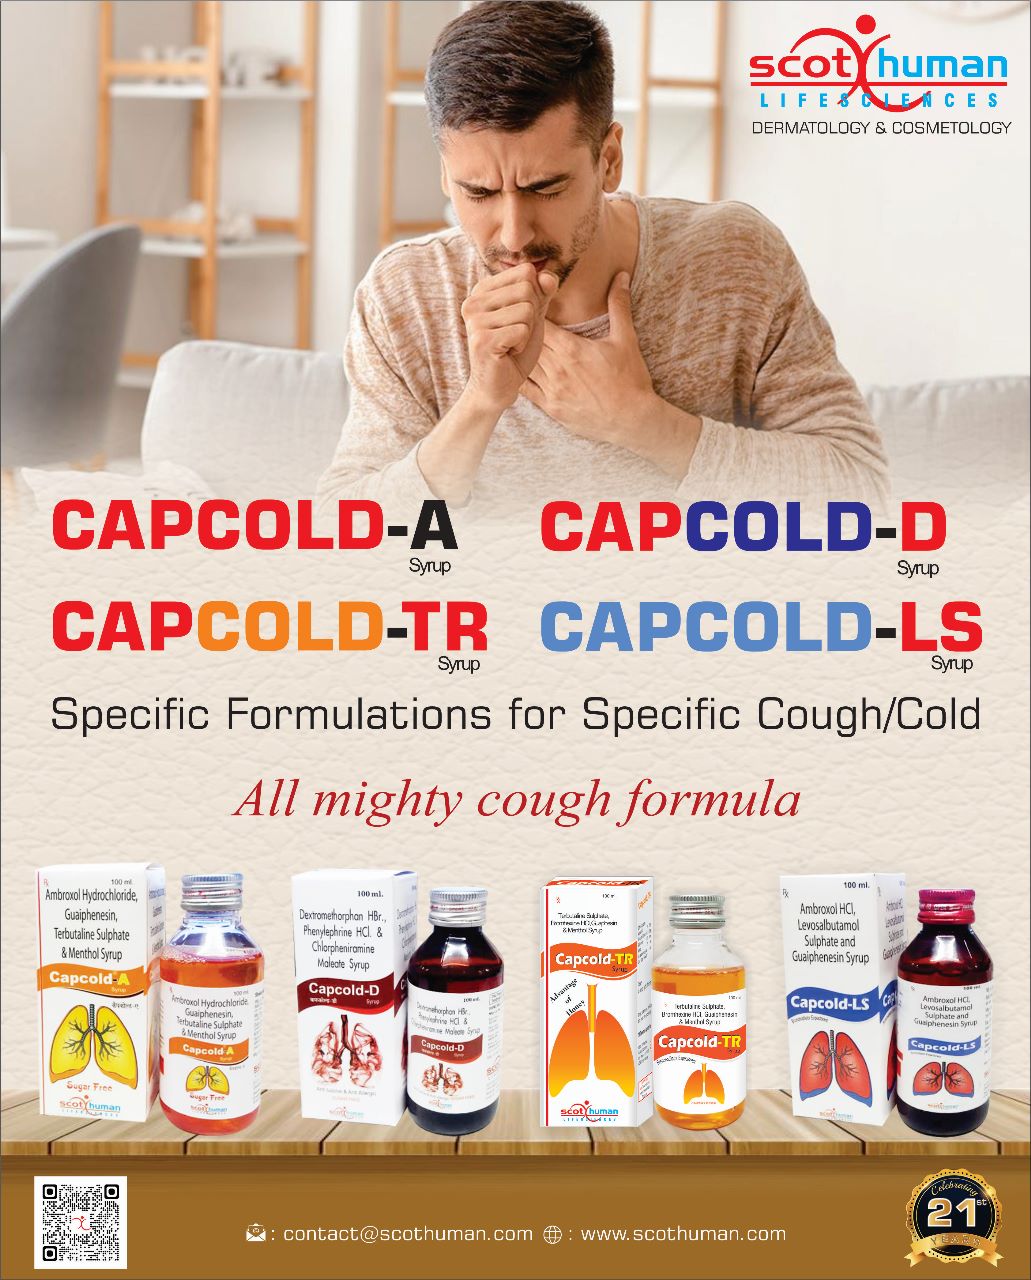 Product Name: Copagold A,Copagold D,Copagold TR,Copagold LS, Compositions of Copagold A,Copagold D,Copagold TR,Copagold LS are Ambroxal Hydrochloride,Guaphenesin,Terbutaline Sulpphate & Methol Syrup - Pharma Drugs and Chemicals